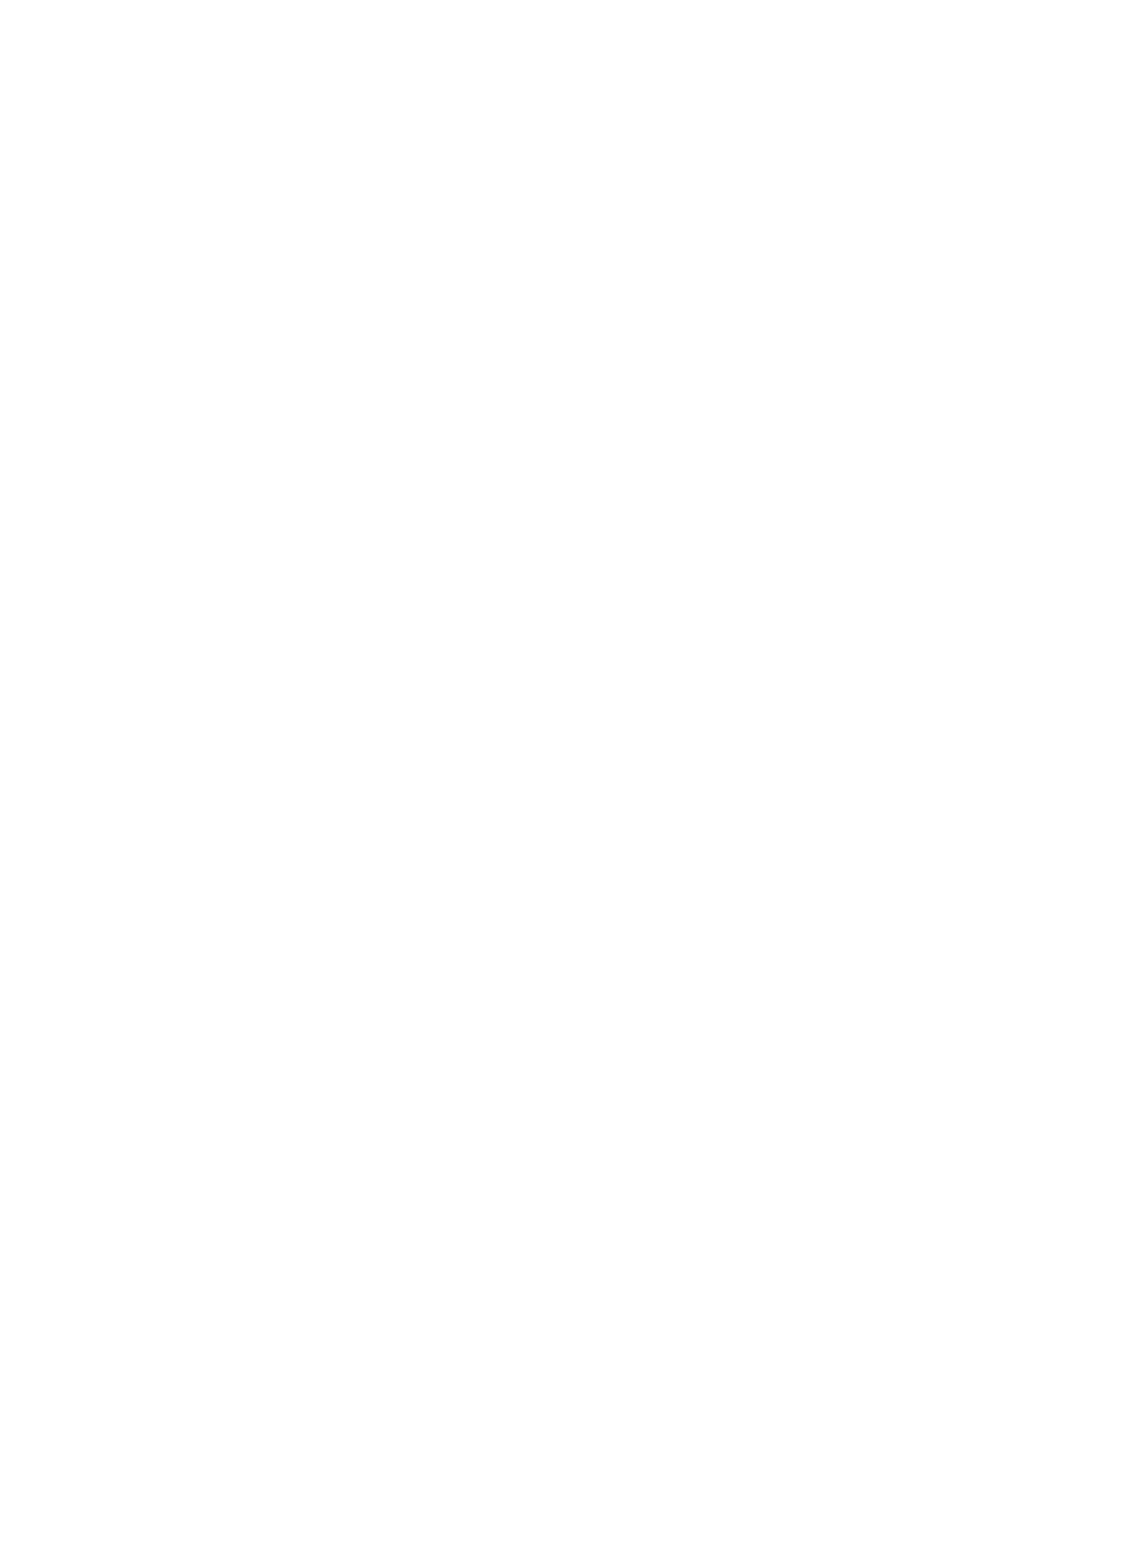 1. Deirmengian et al. Validation of the Alpha Defensin Lateral Flow Test for Periprosthetic Joint Infection. J Bone J...